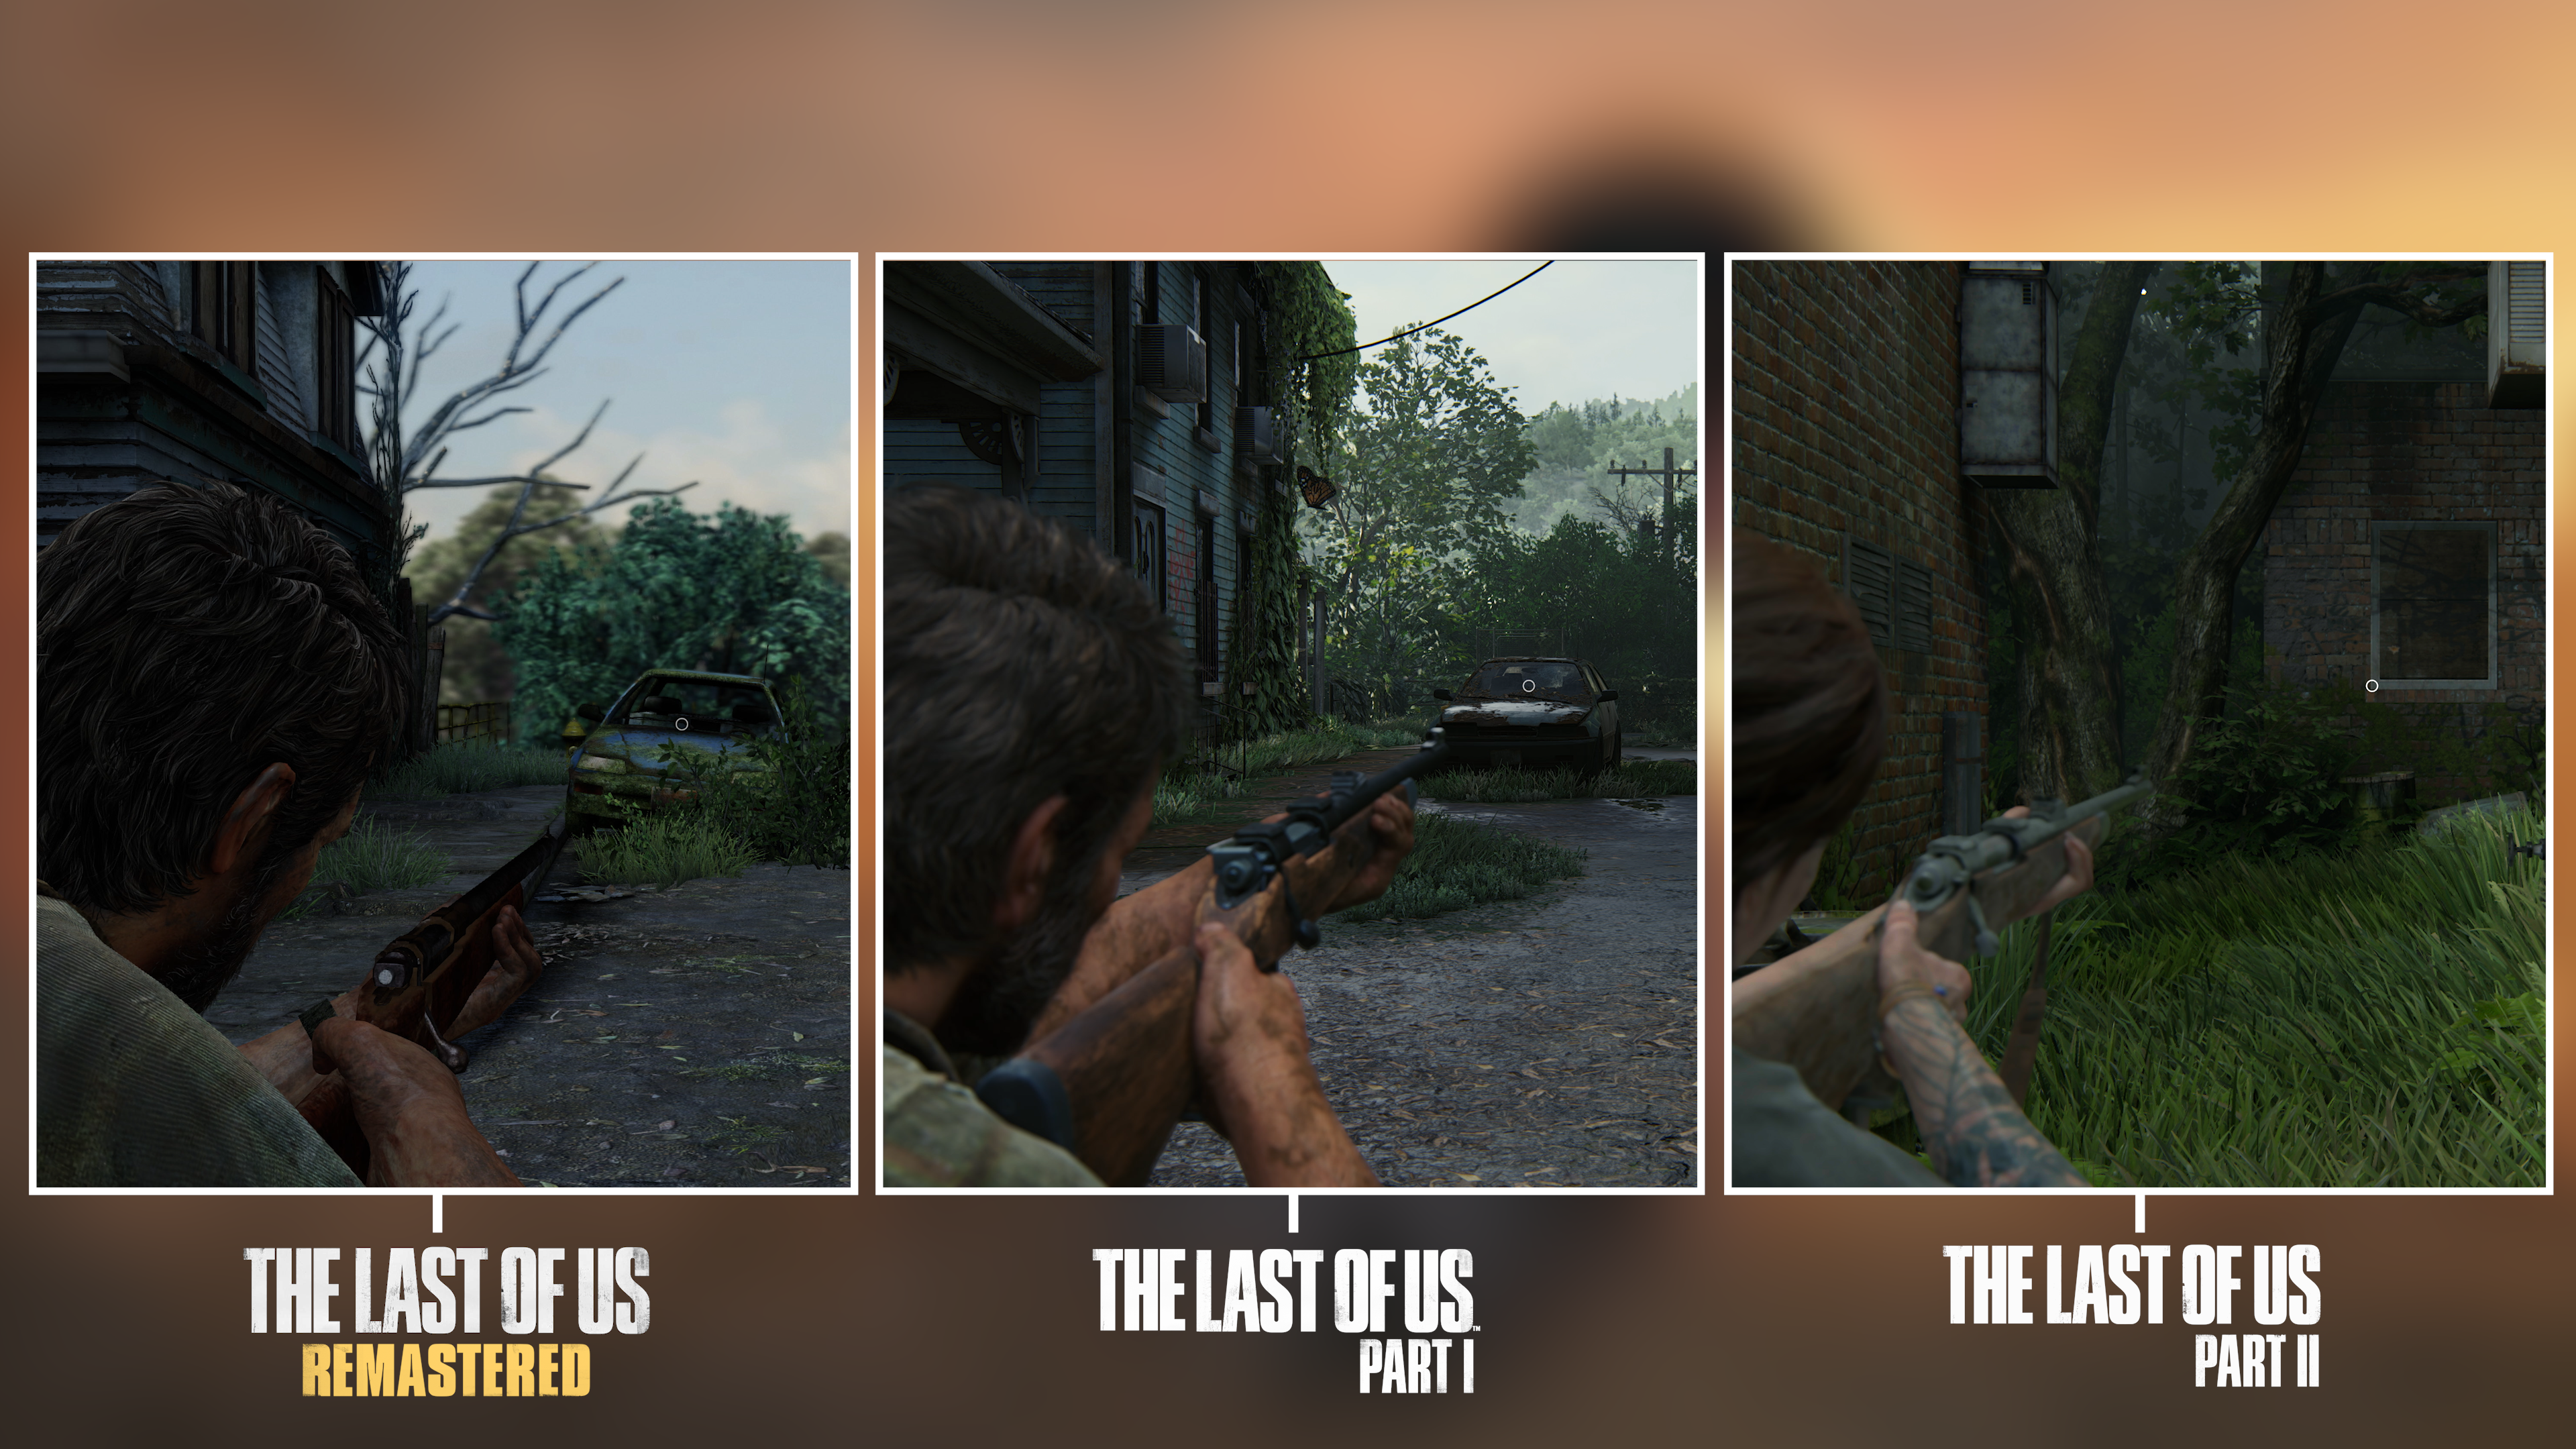 Digital Foundry on X: The Last of Us Part 1 on PC! It's hard to deliver a  tech review for an obviously unfinished game that's already been patched  twice - but here's